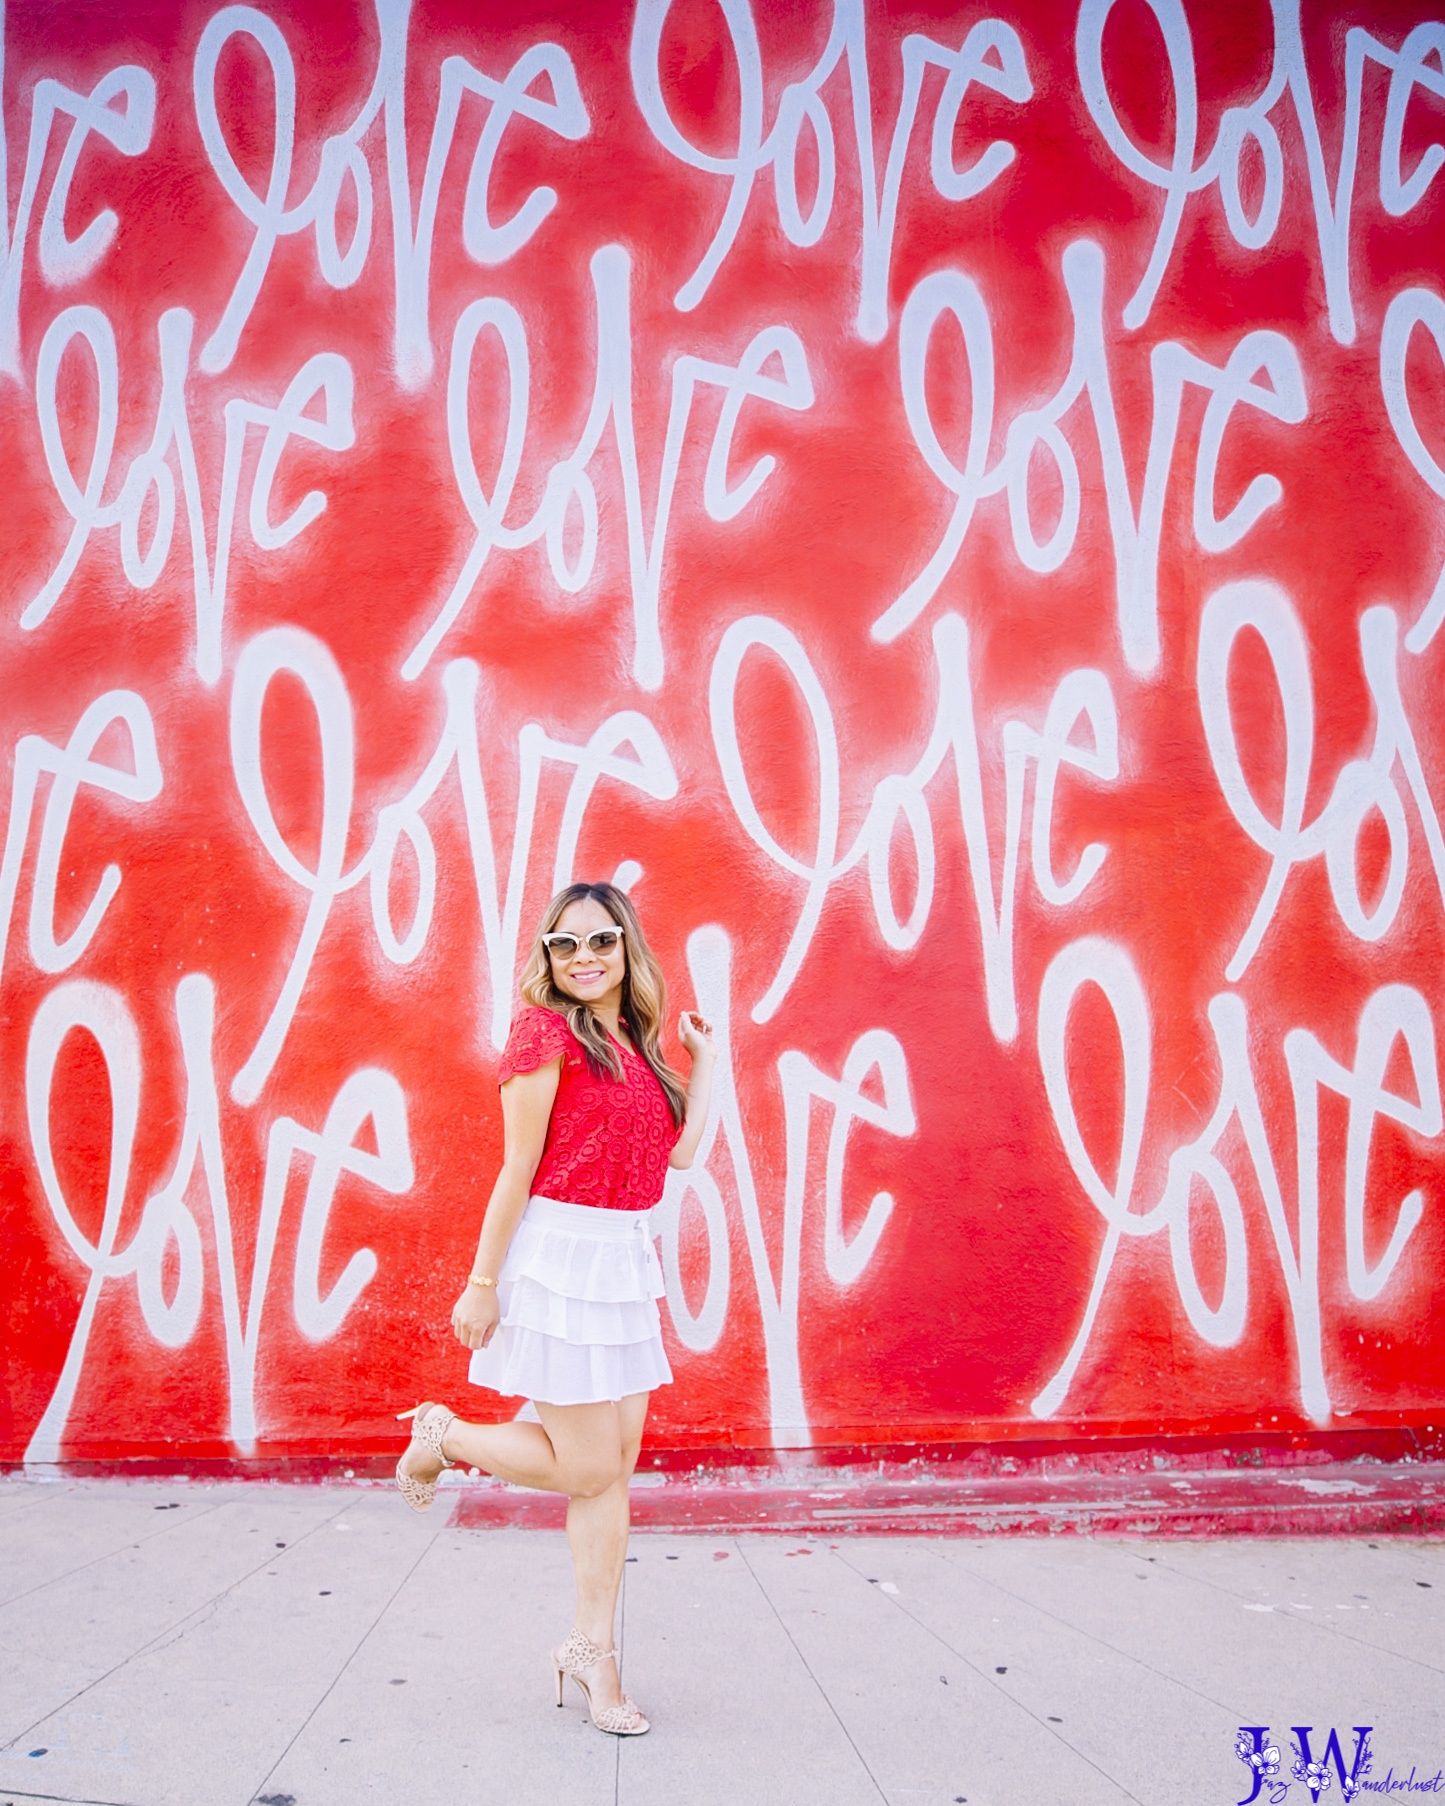 Love mural at Smashbox Studio in Culver City, Los Angeles. Photography by Jaz Wanderlust.